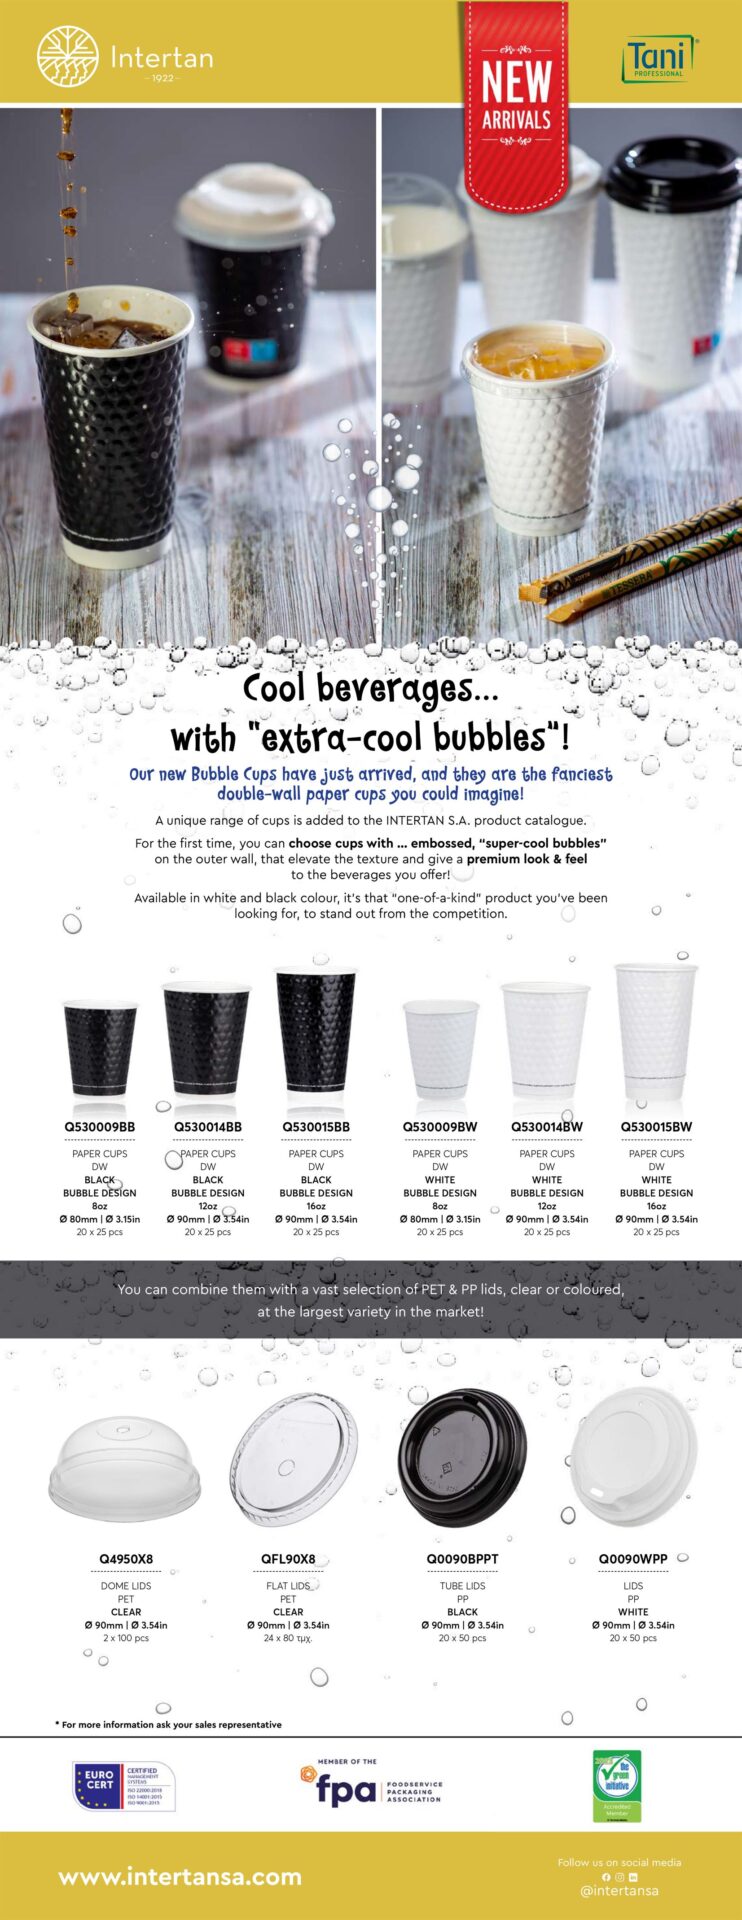 New Bubble-Wall Paper Cups Newsletter | Intertan S.A.